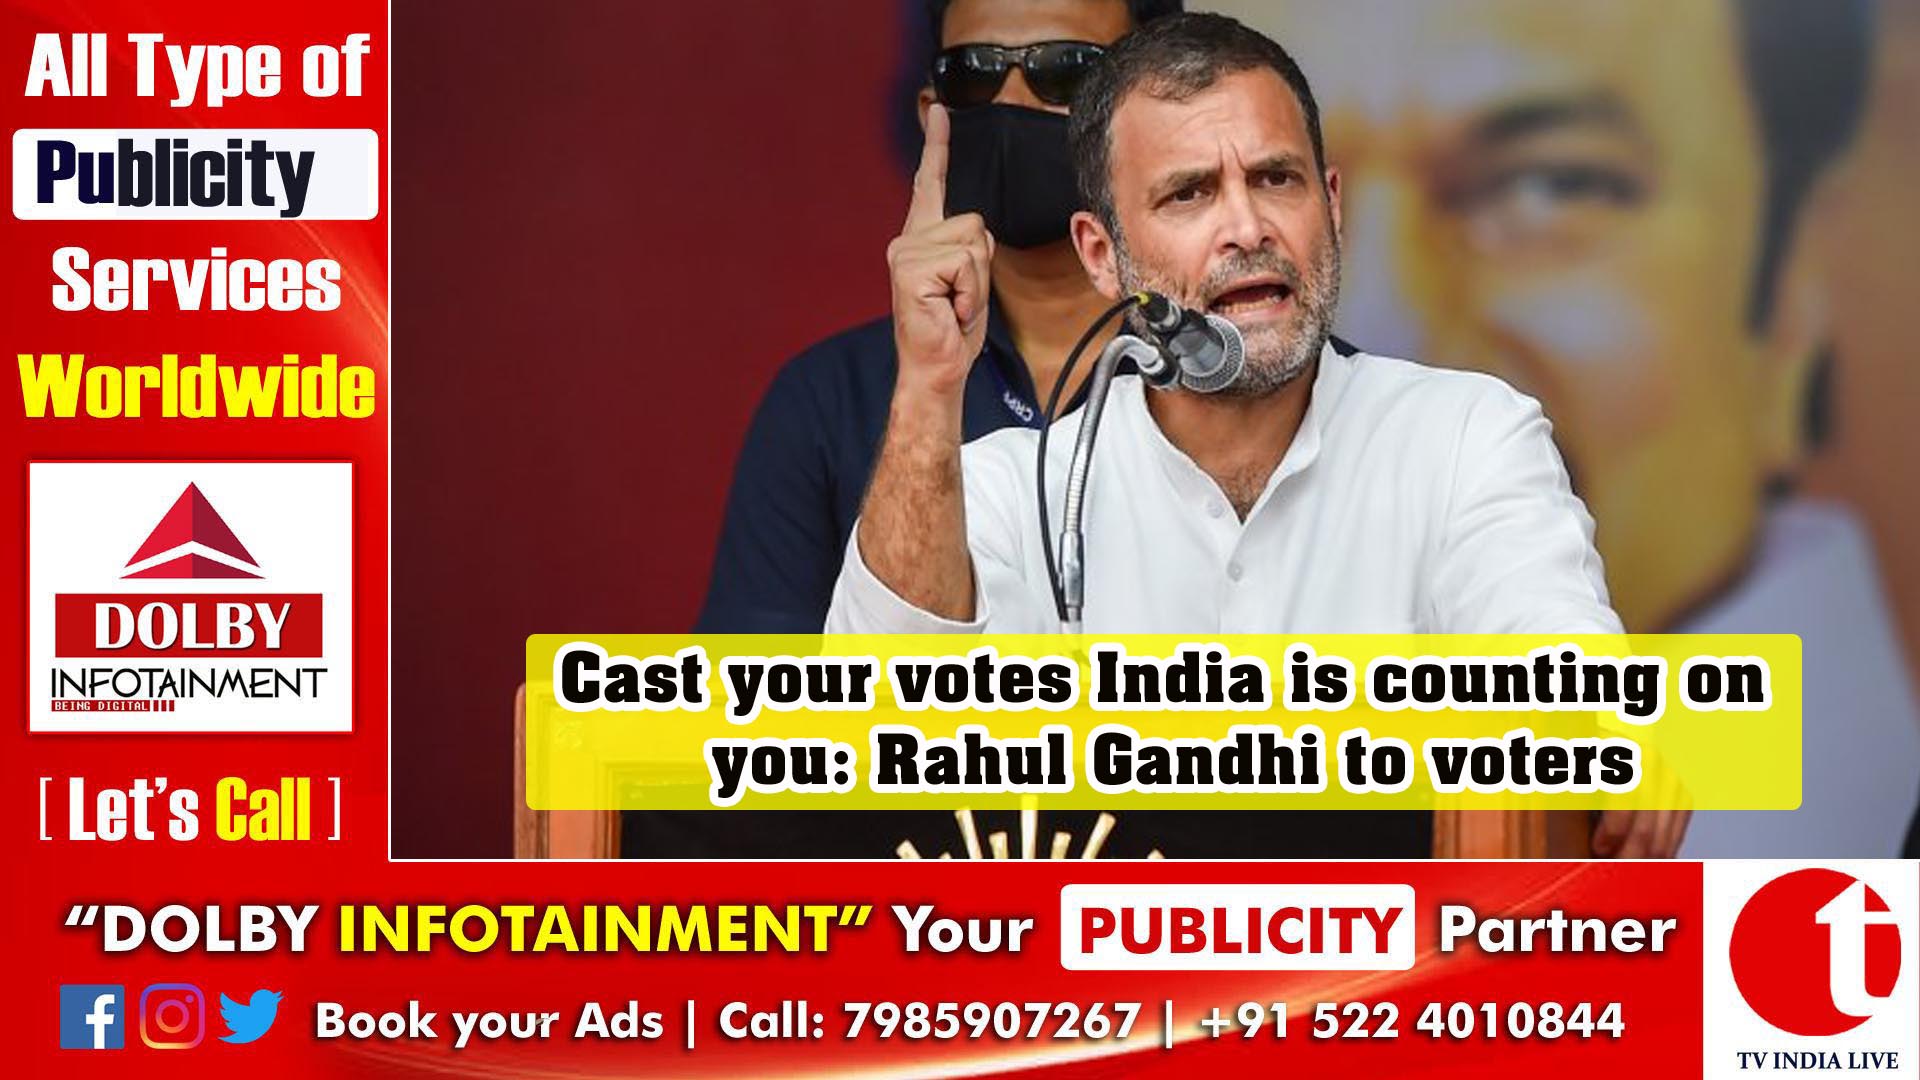 Cast your votes India is counting on you : Rahul Gandhi to voters